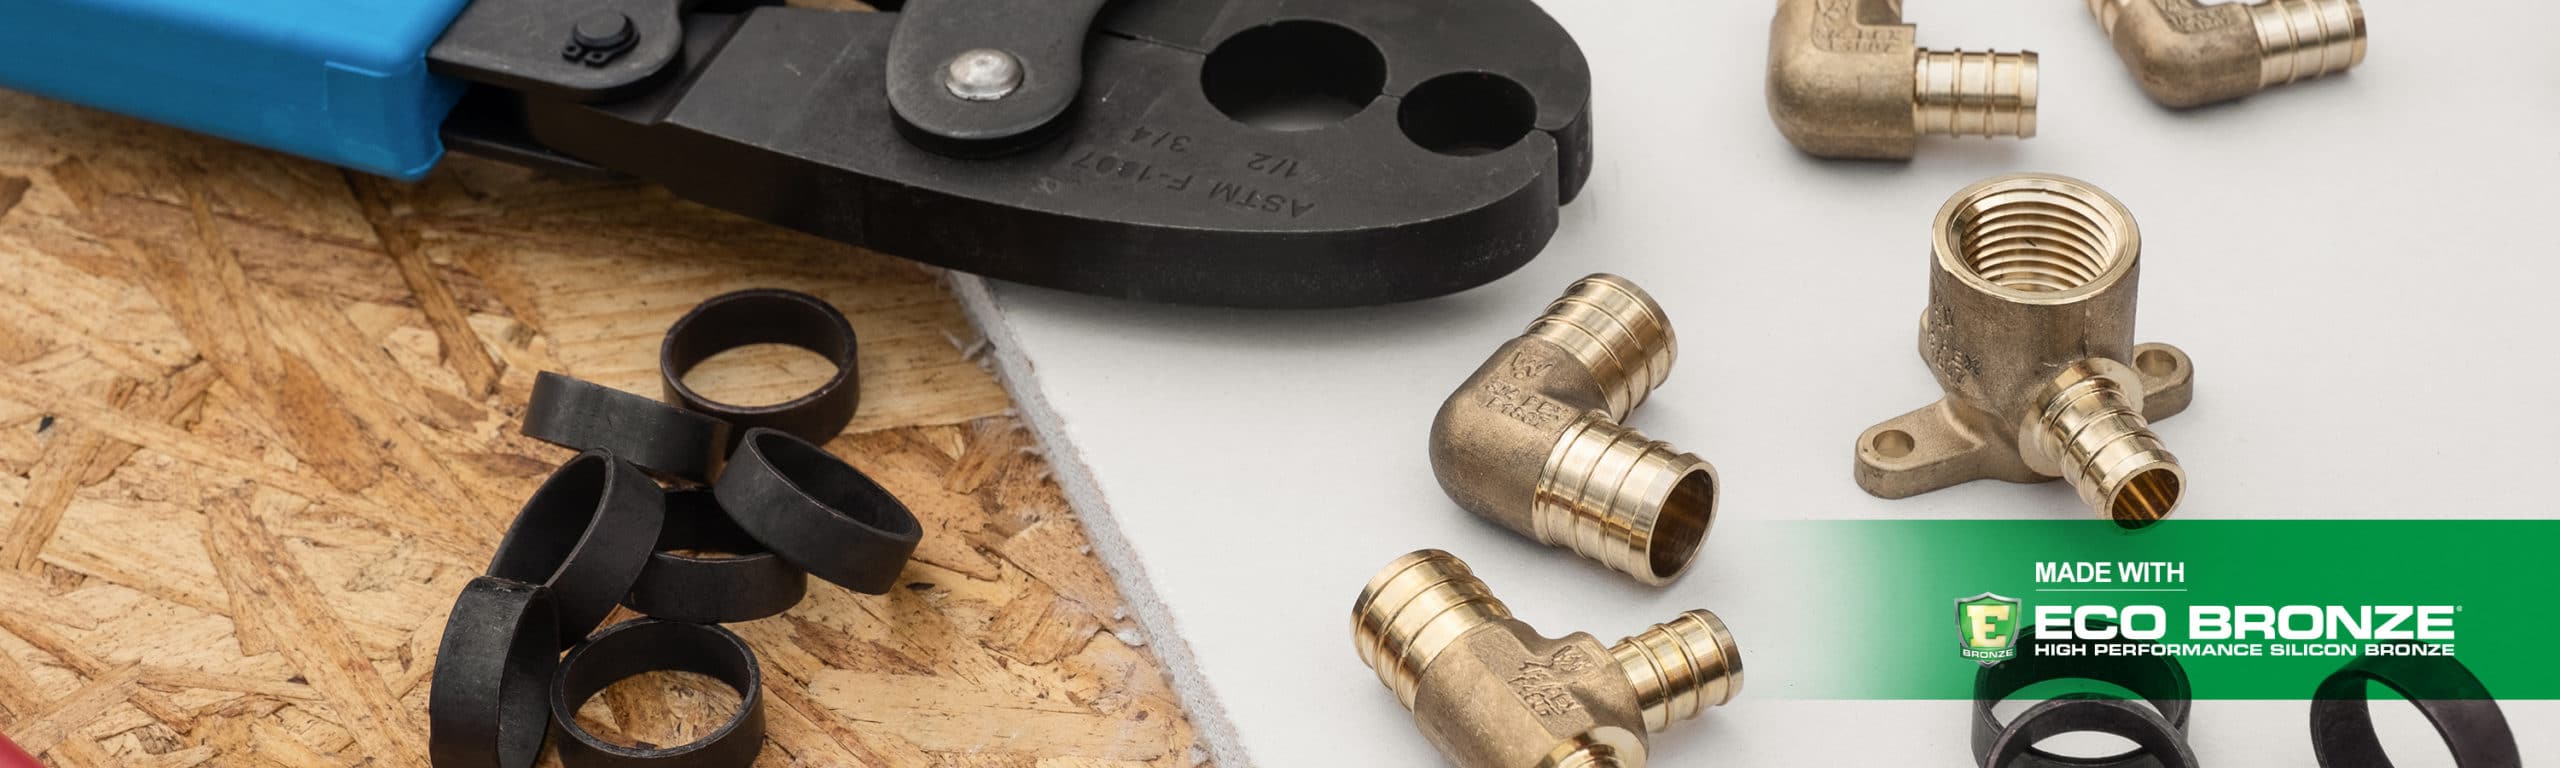 The Brass Warehouse Eco Bronze Fittings